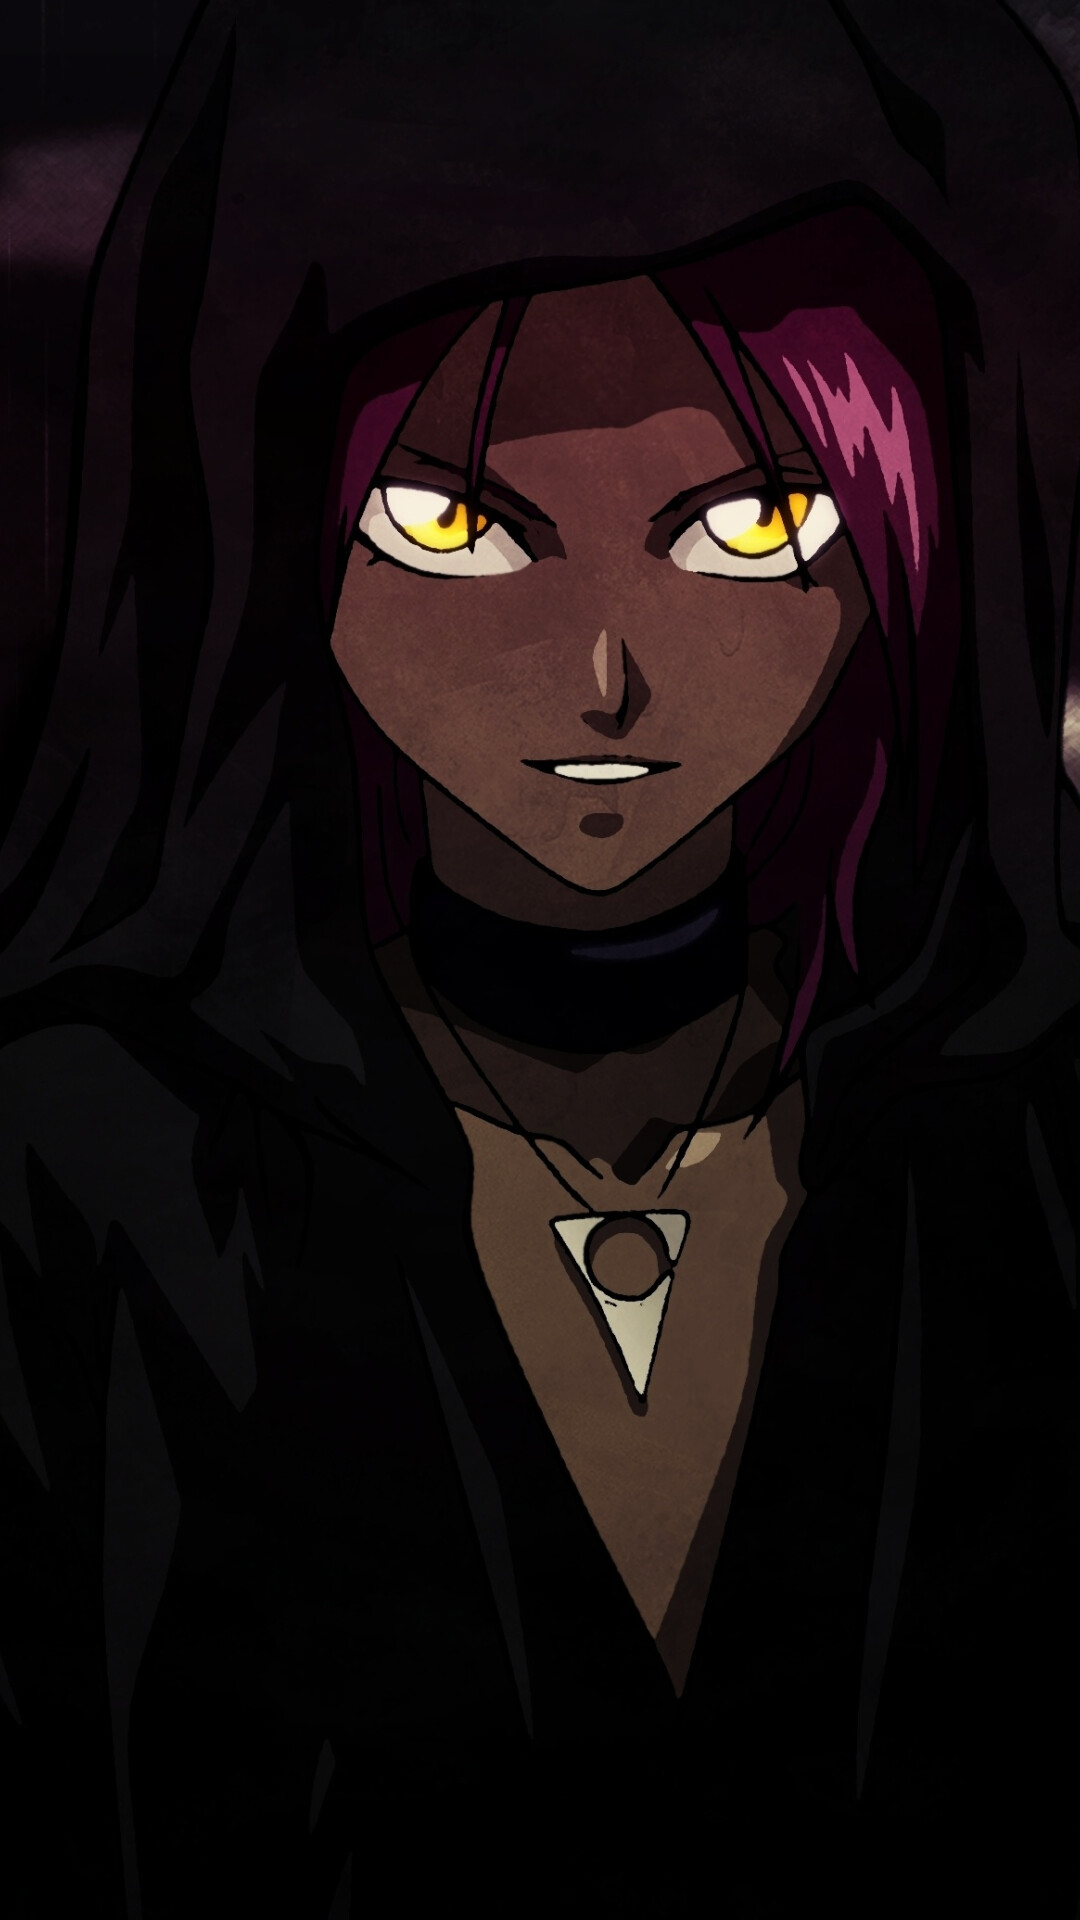 Bleach: Yoruichi Shihoin, the former captain of the 2nd Division of the Gotei 13. 1080x1920 Full HD Wallpaper.